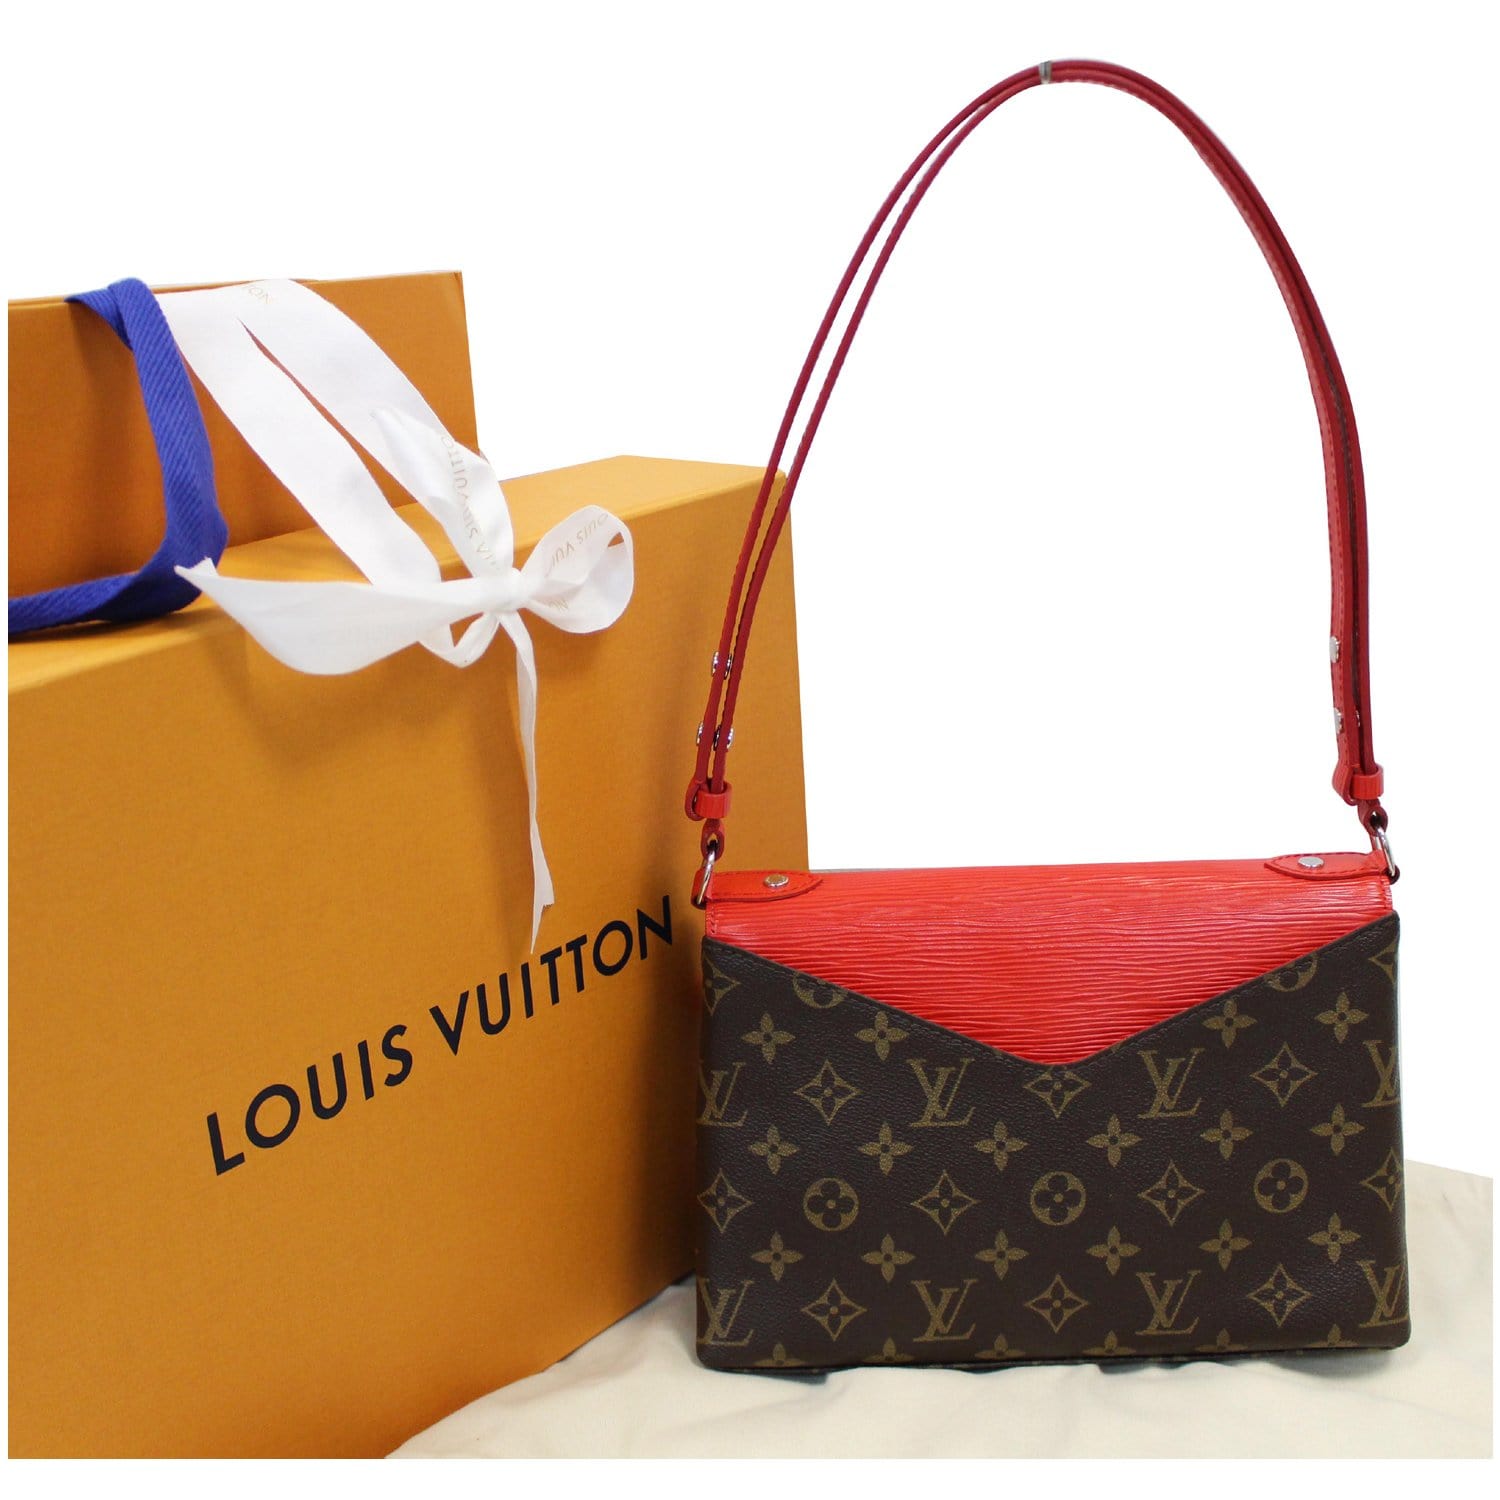 Saint michel leather handbag Louis Vuitton Red in Leather - 30443768